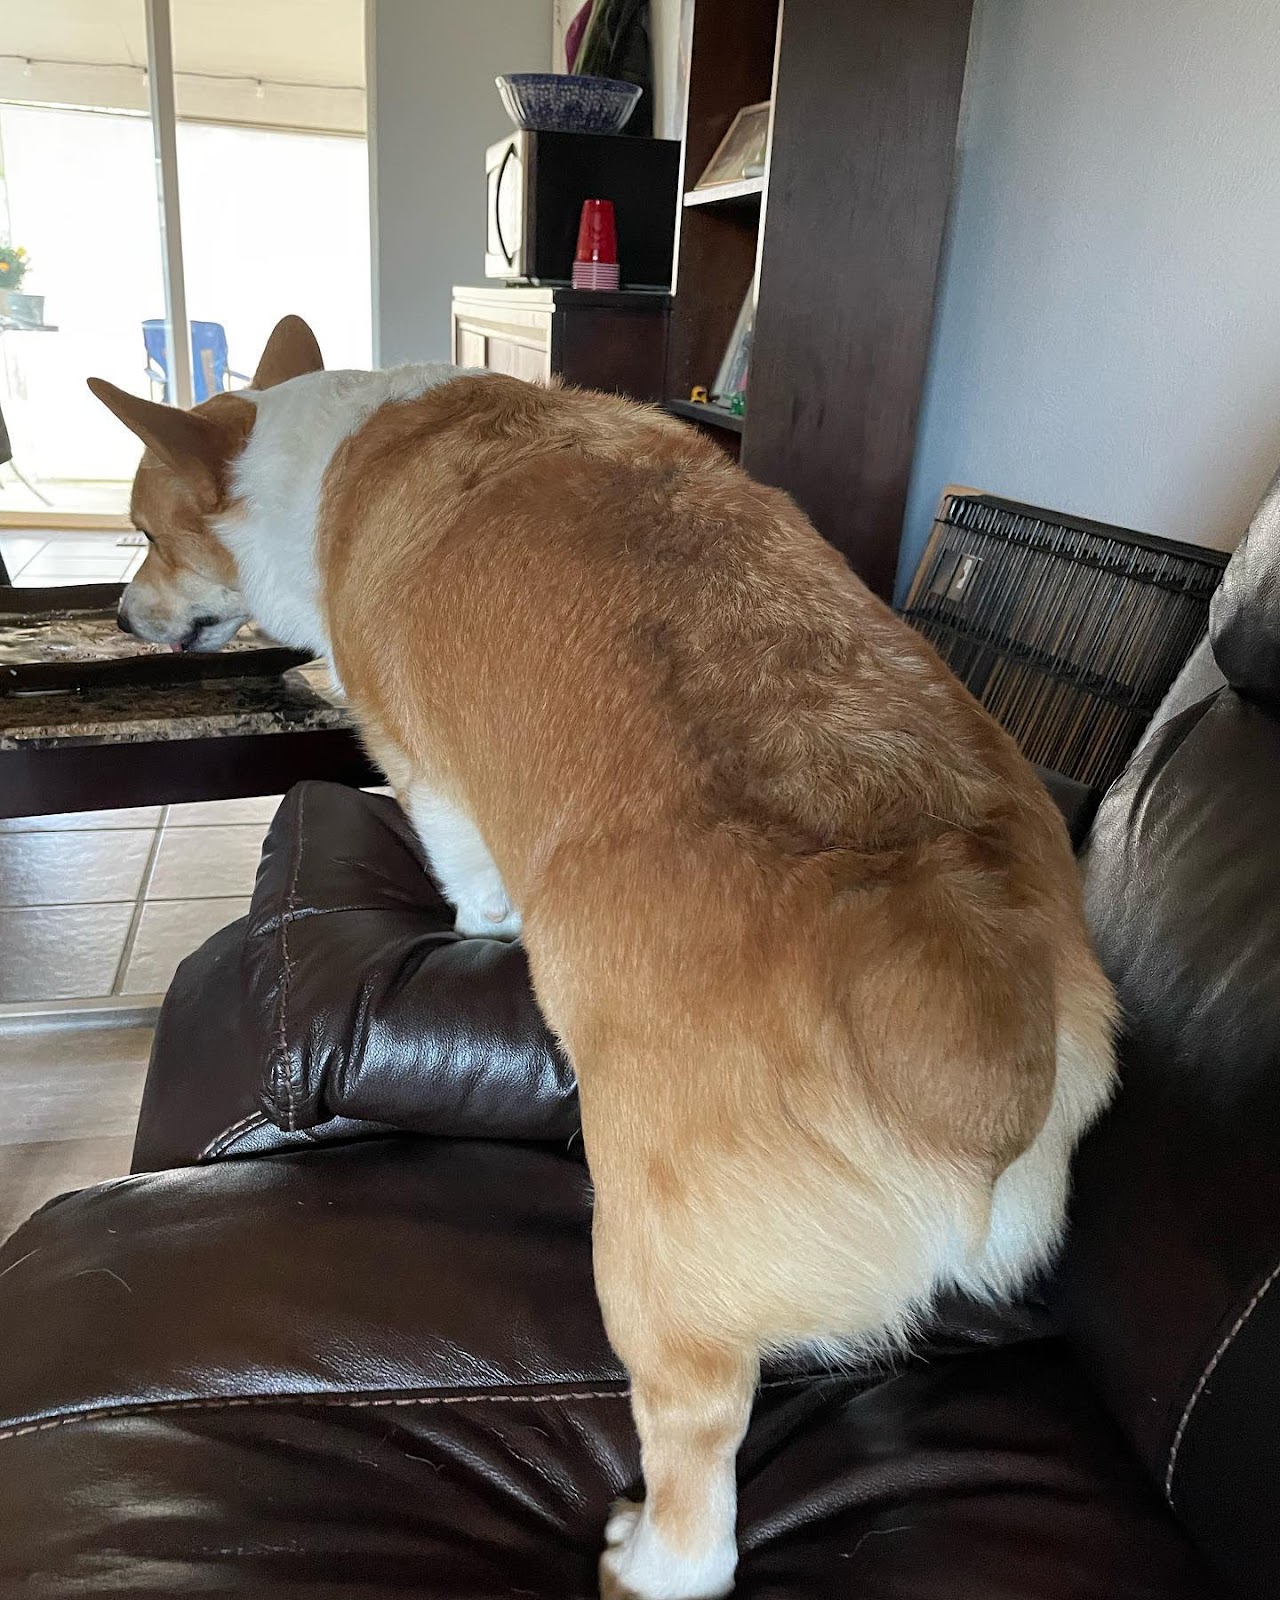 Photo by Louie DOG Corgi Monster on August 17, 2023. May be an image of corgi.